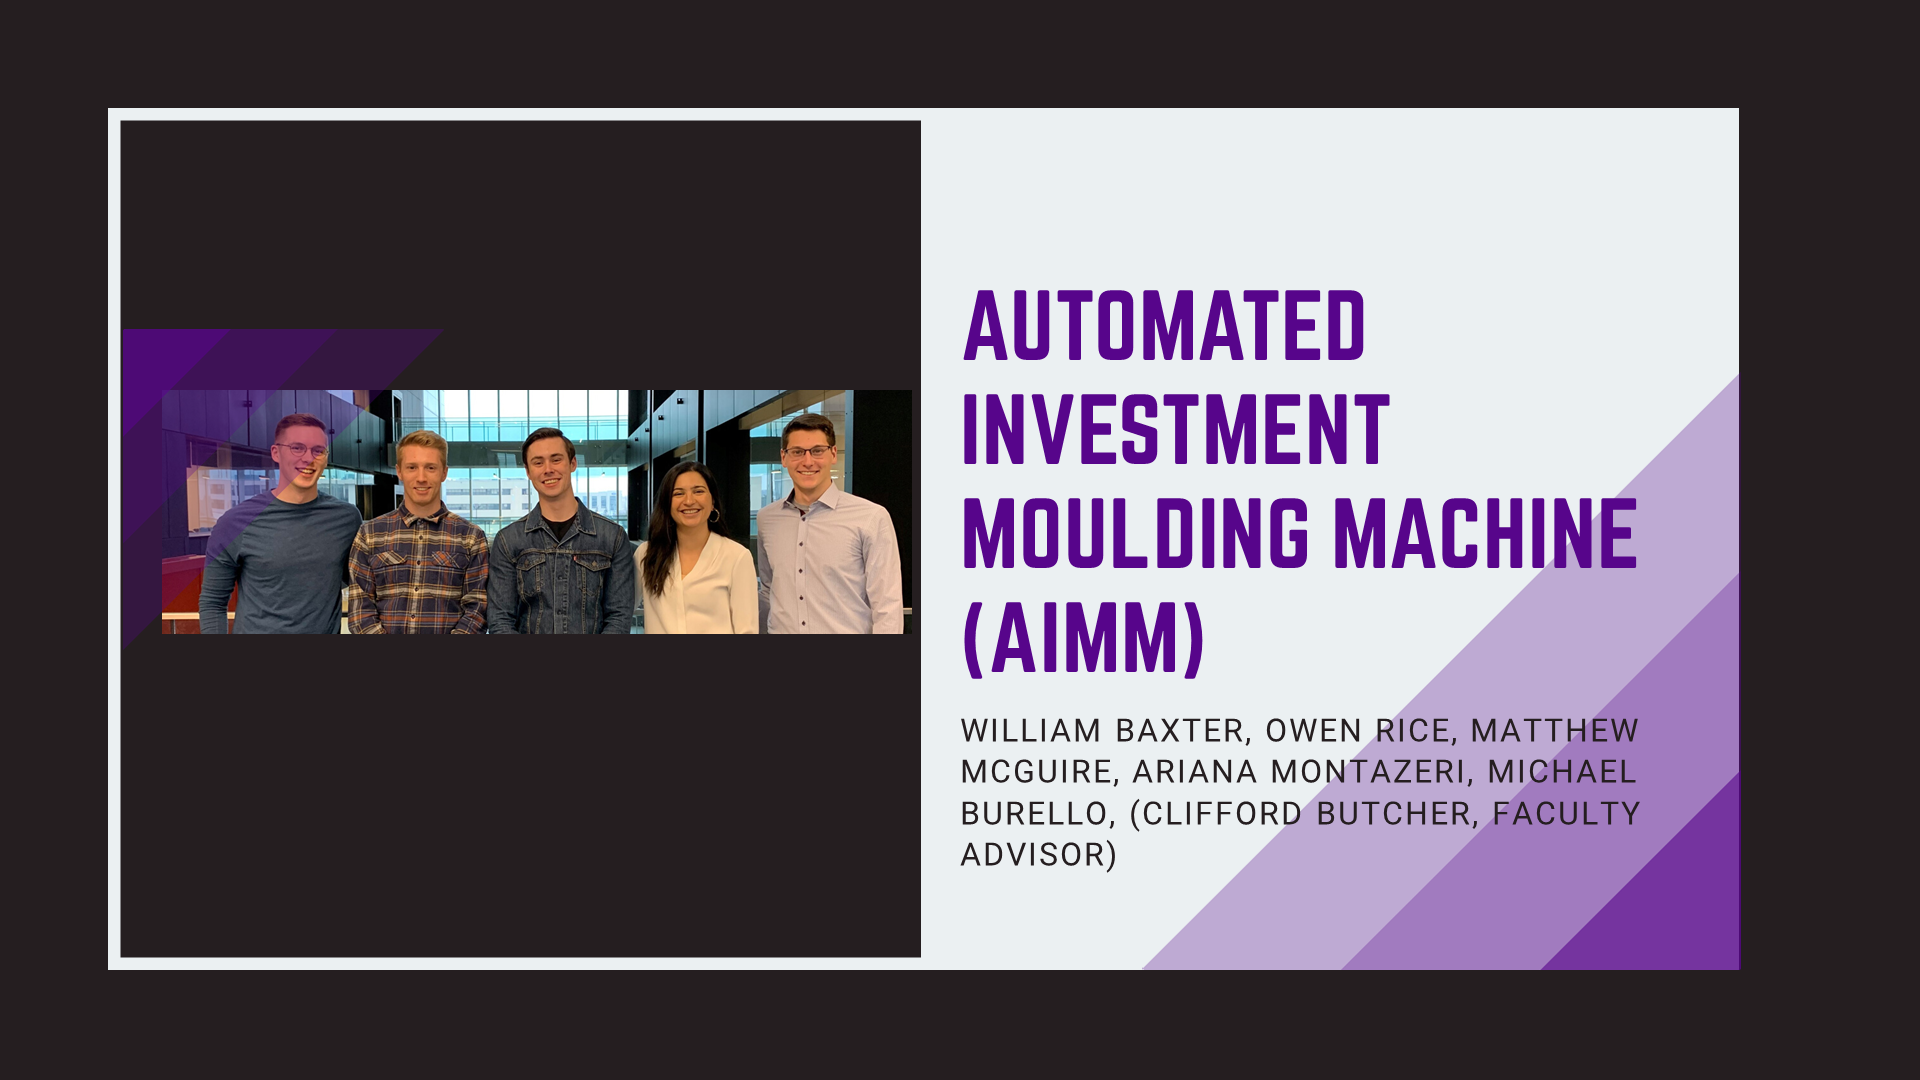 Automated Investment Moulding Machine (AIMM)